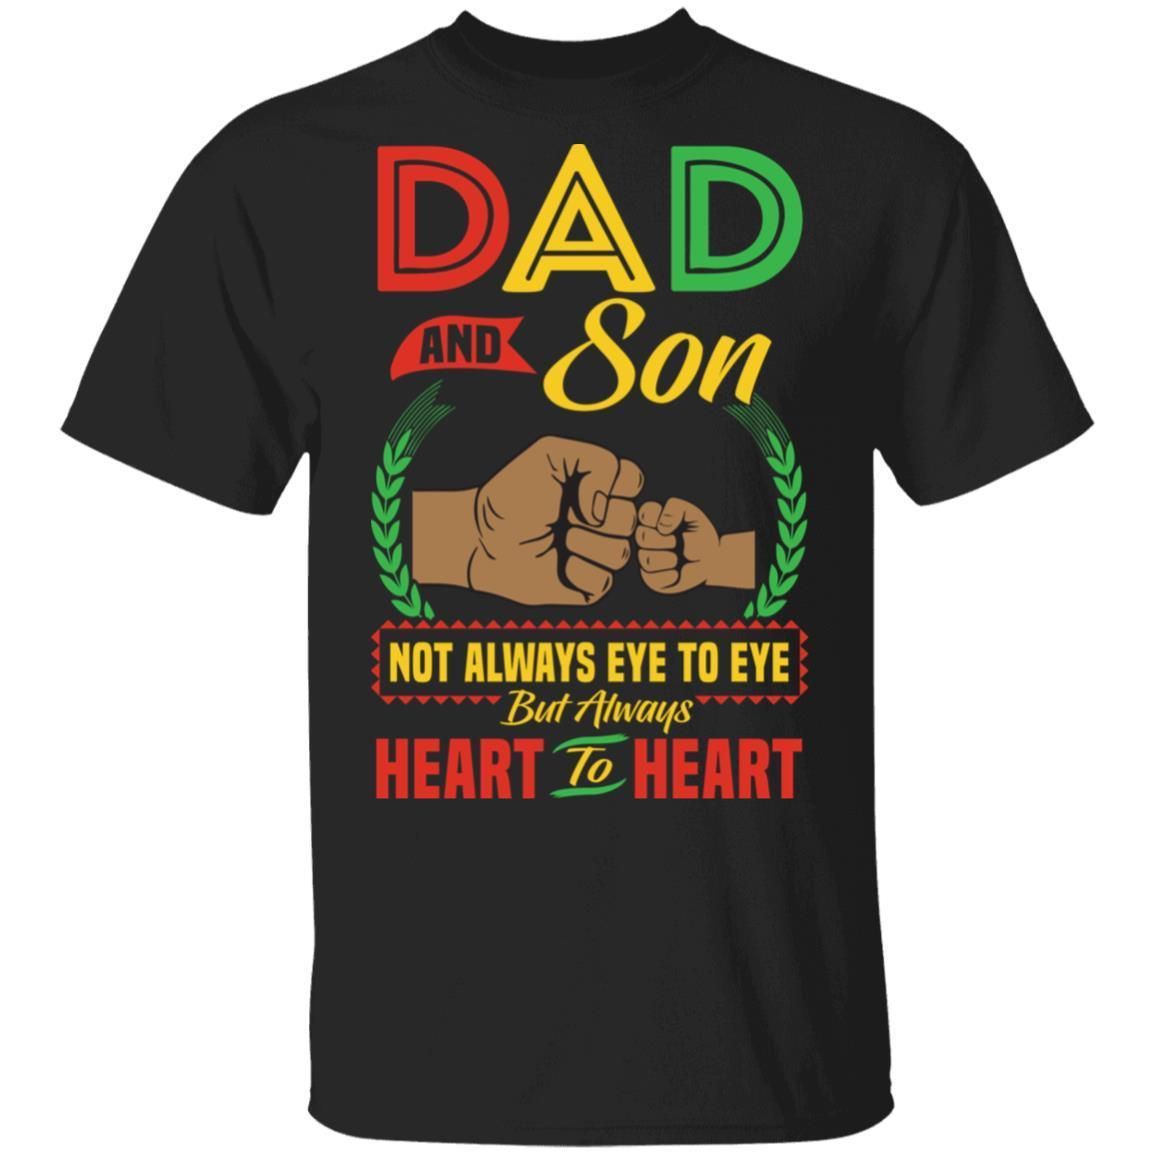 Dad And Son Heart To Heart T-Shirt